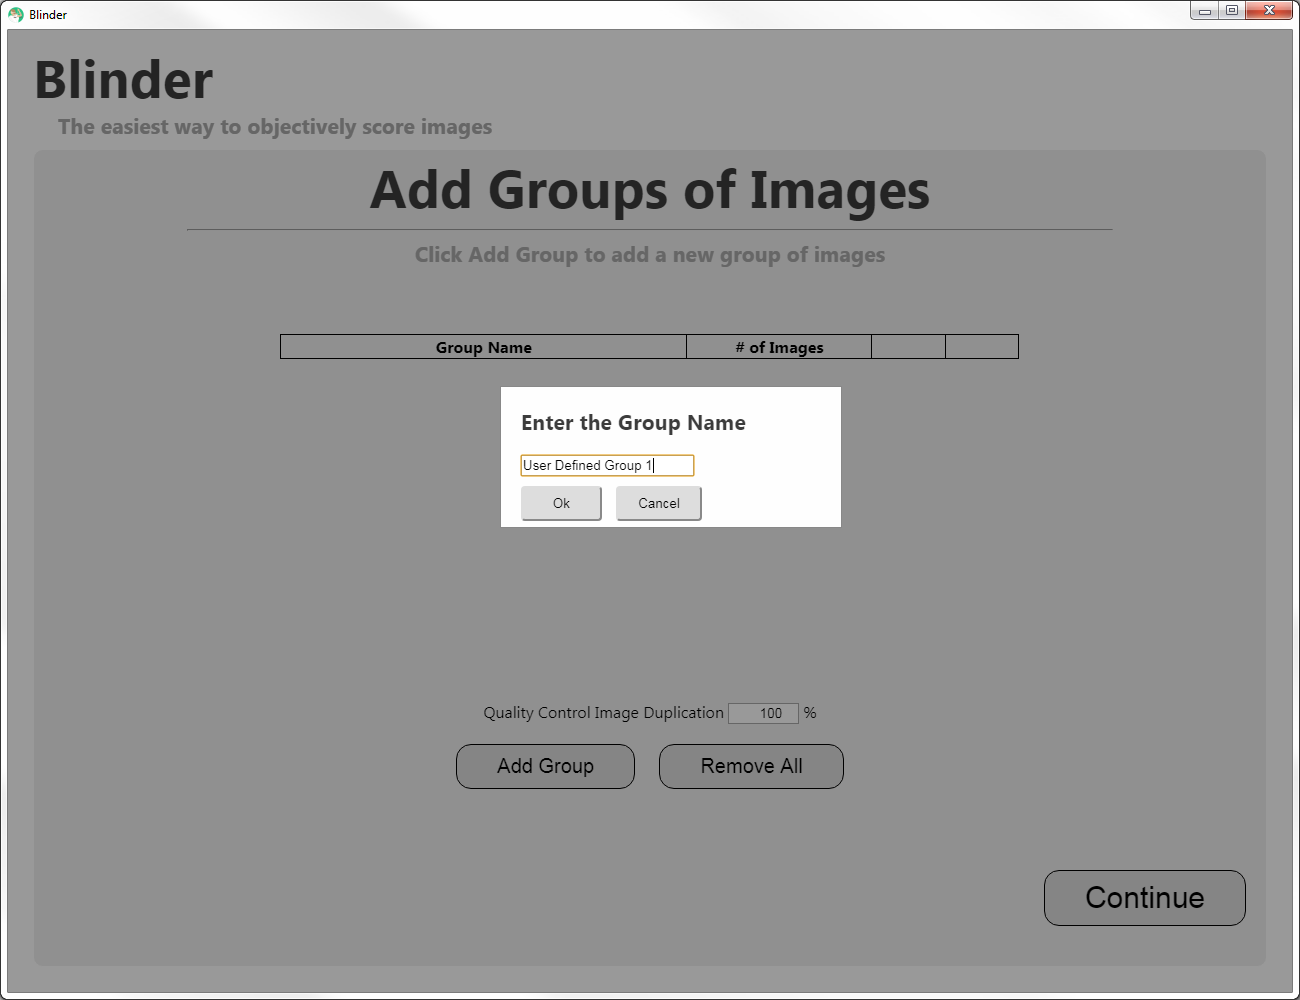 Add Groups of Images